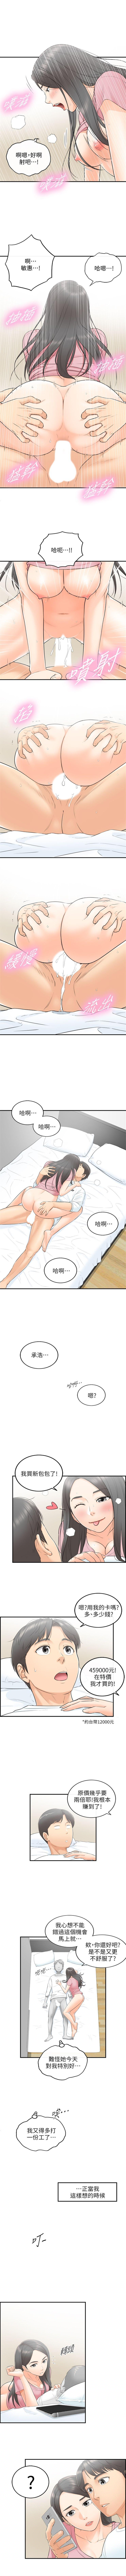 Squirting 正妹小主管 1-54 官方中文（連載中） Mofos - Page 7